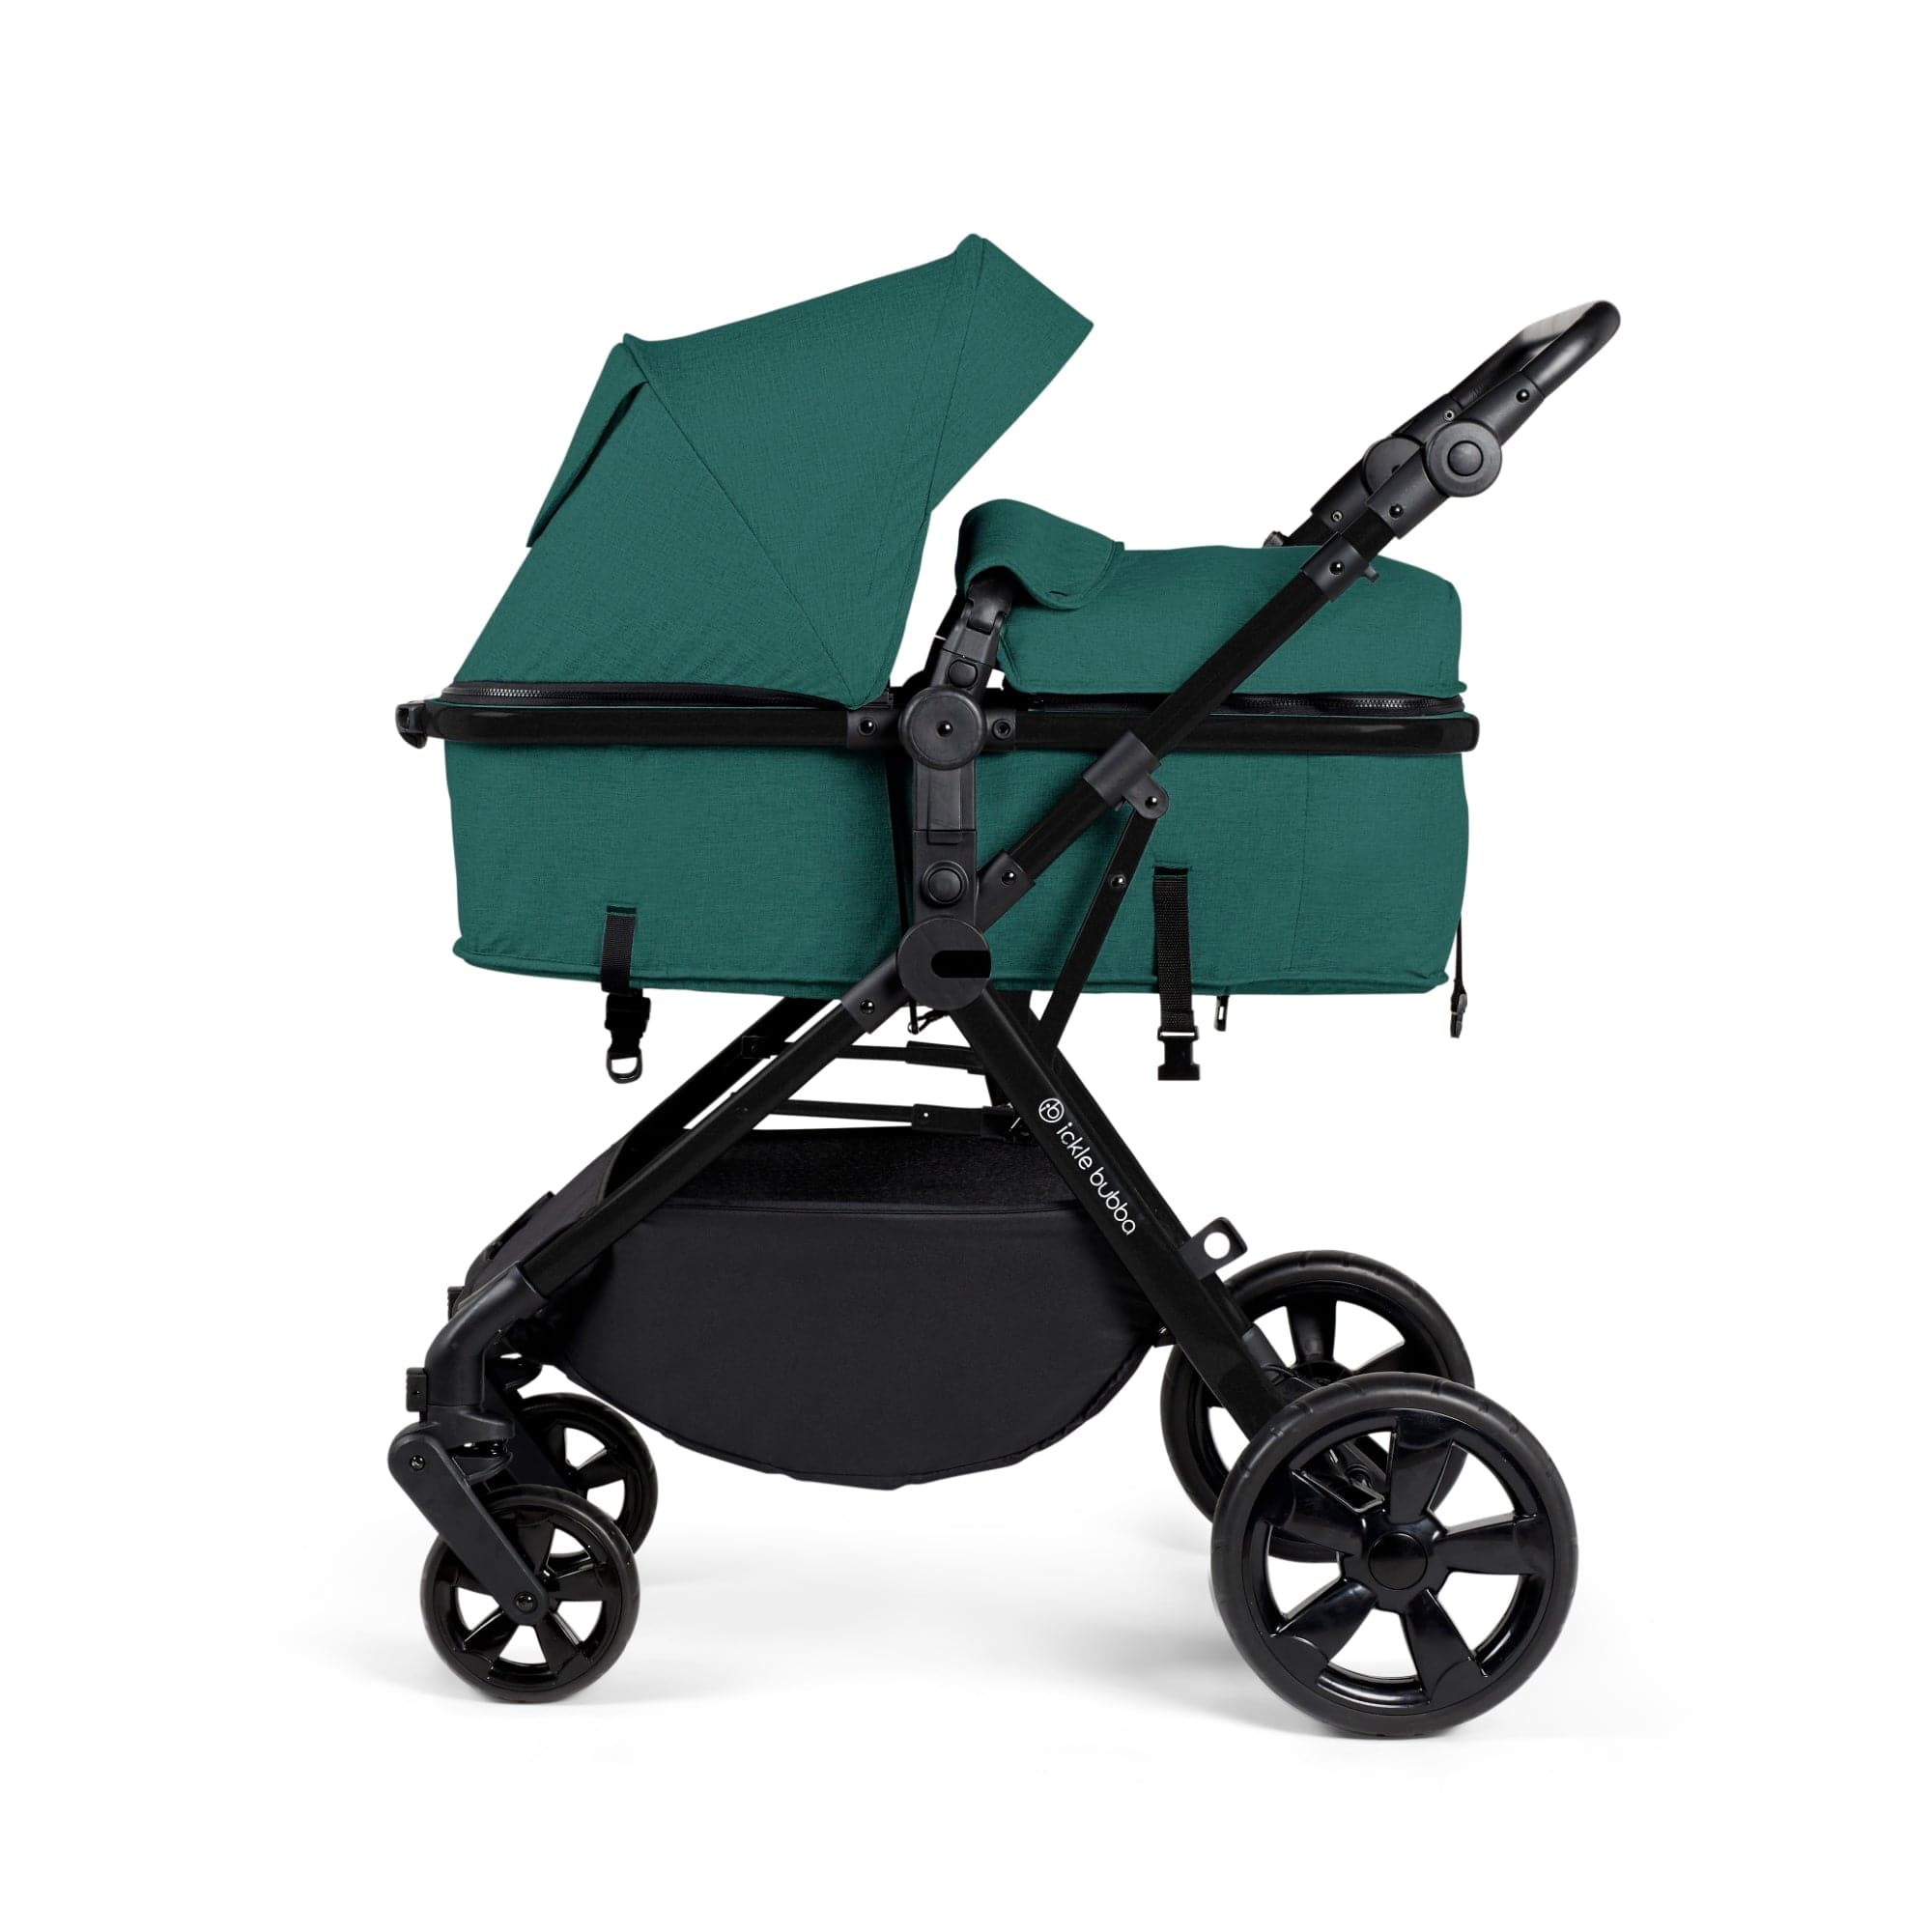 Ickle Bubba Comet 3-In-1 Travel System With Astral Car Seat Dusky